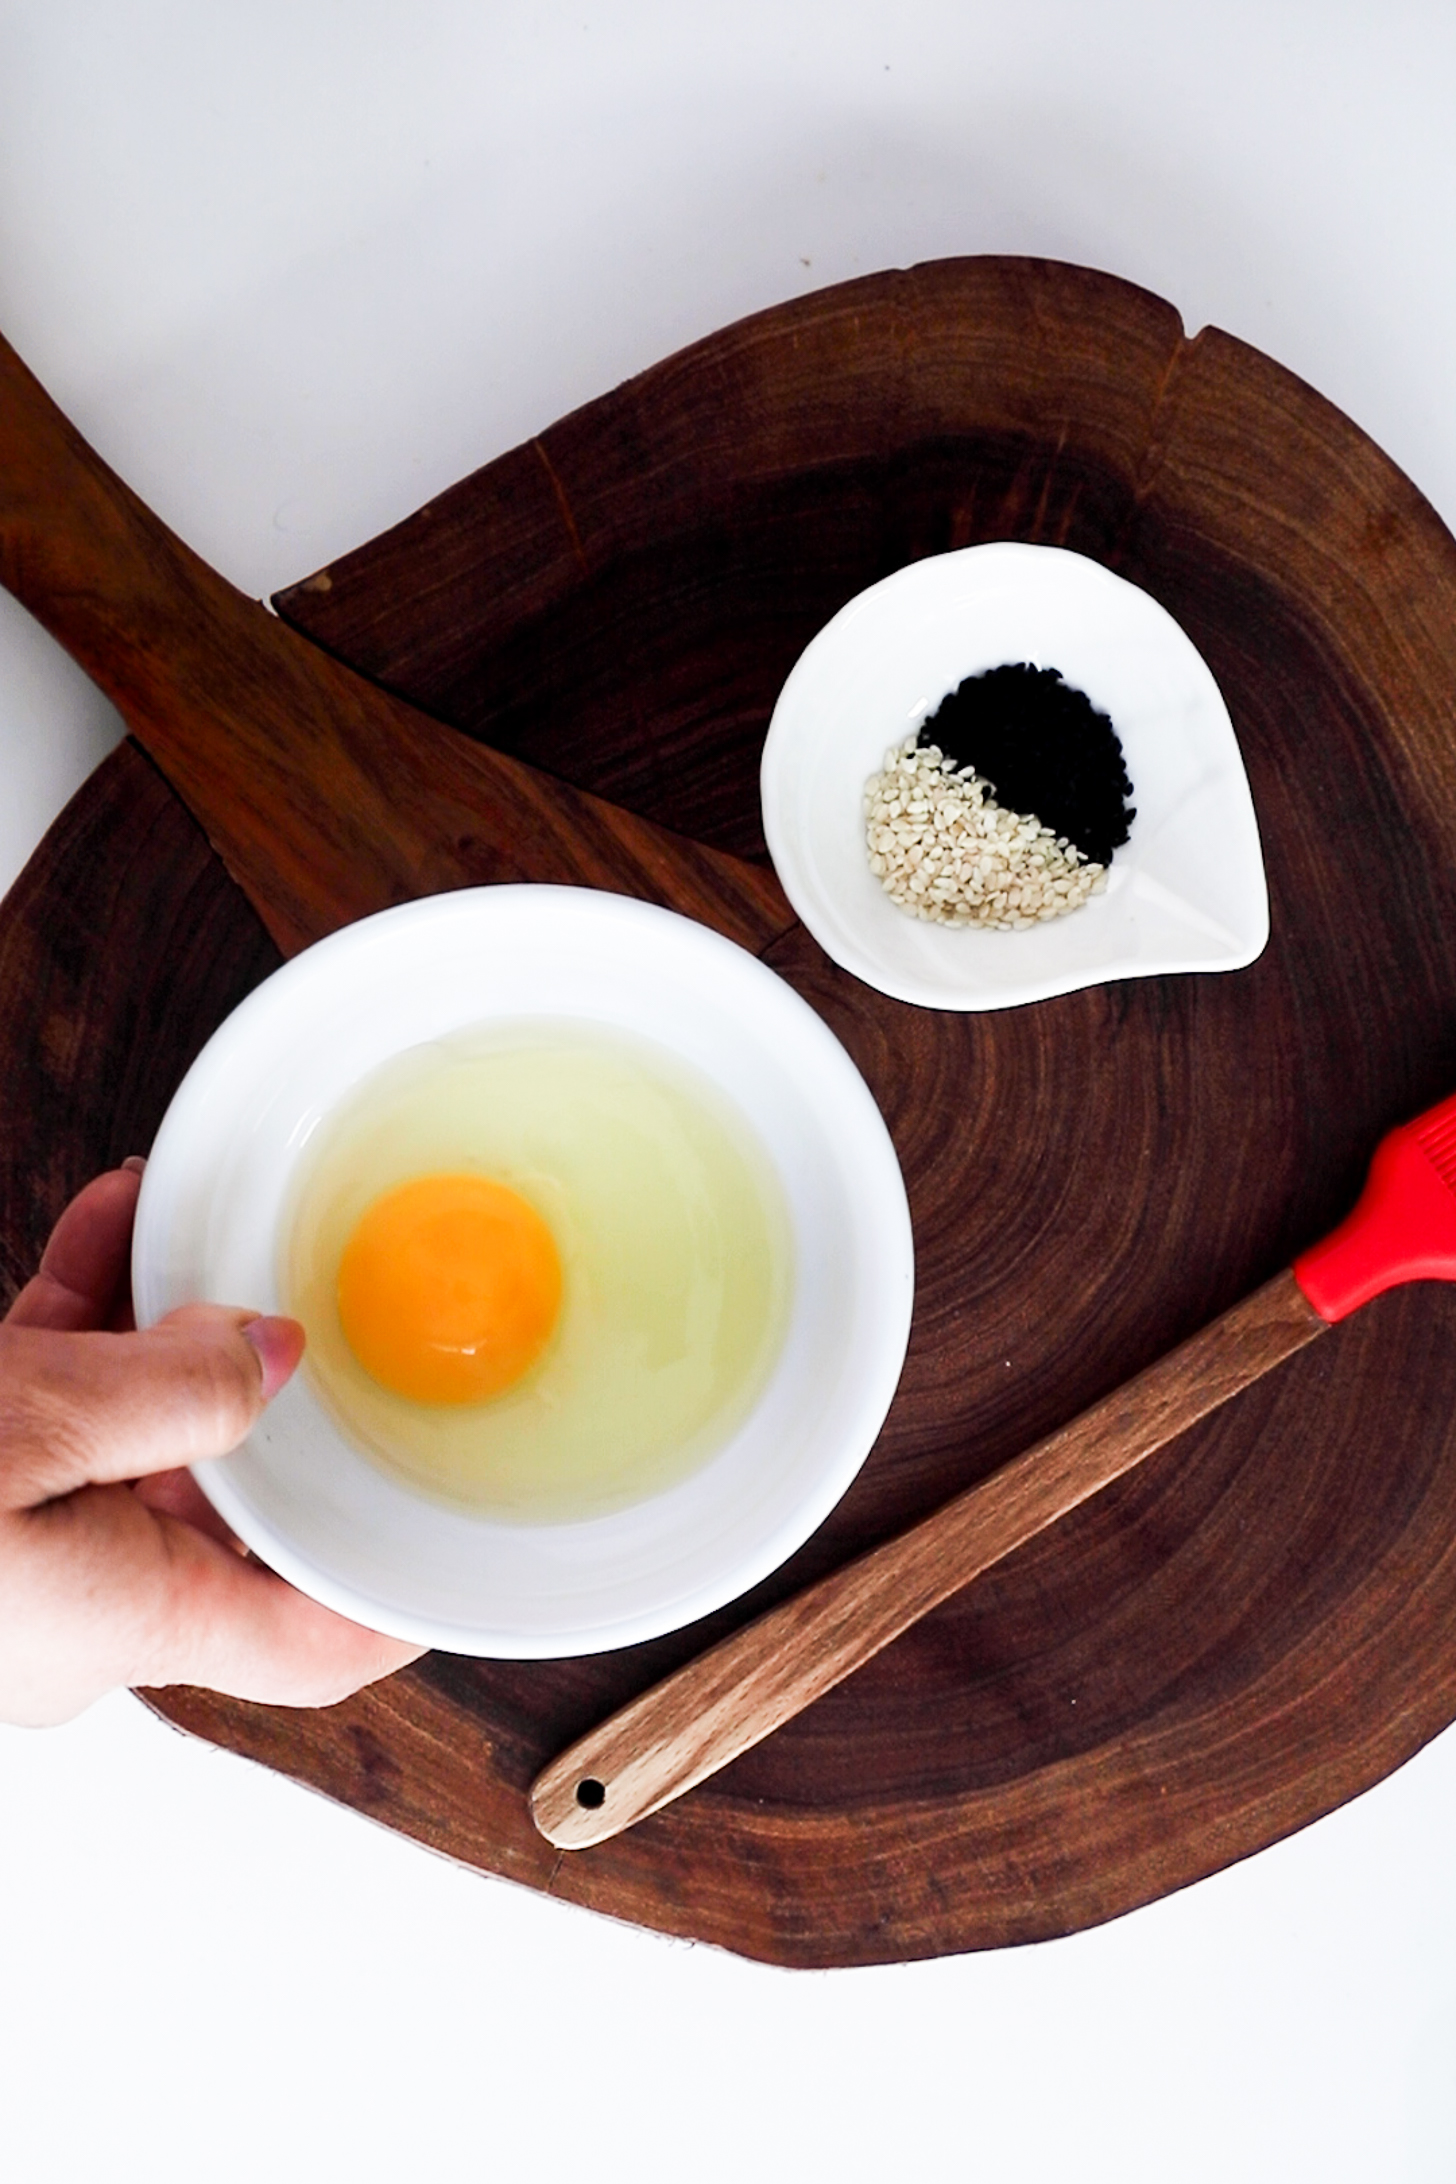 A hand holding a bowl with a cracked egg, accompanied by a ramekin of seeds, all arranged on a wooden board.